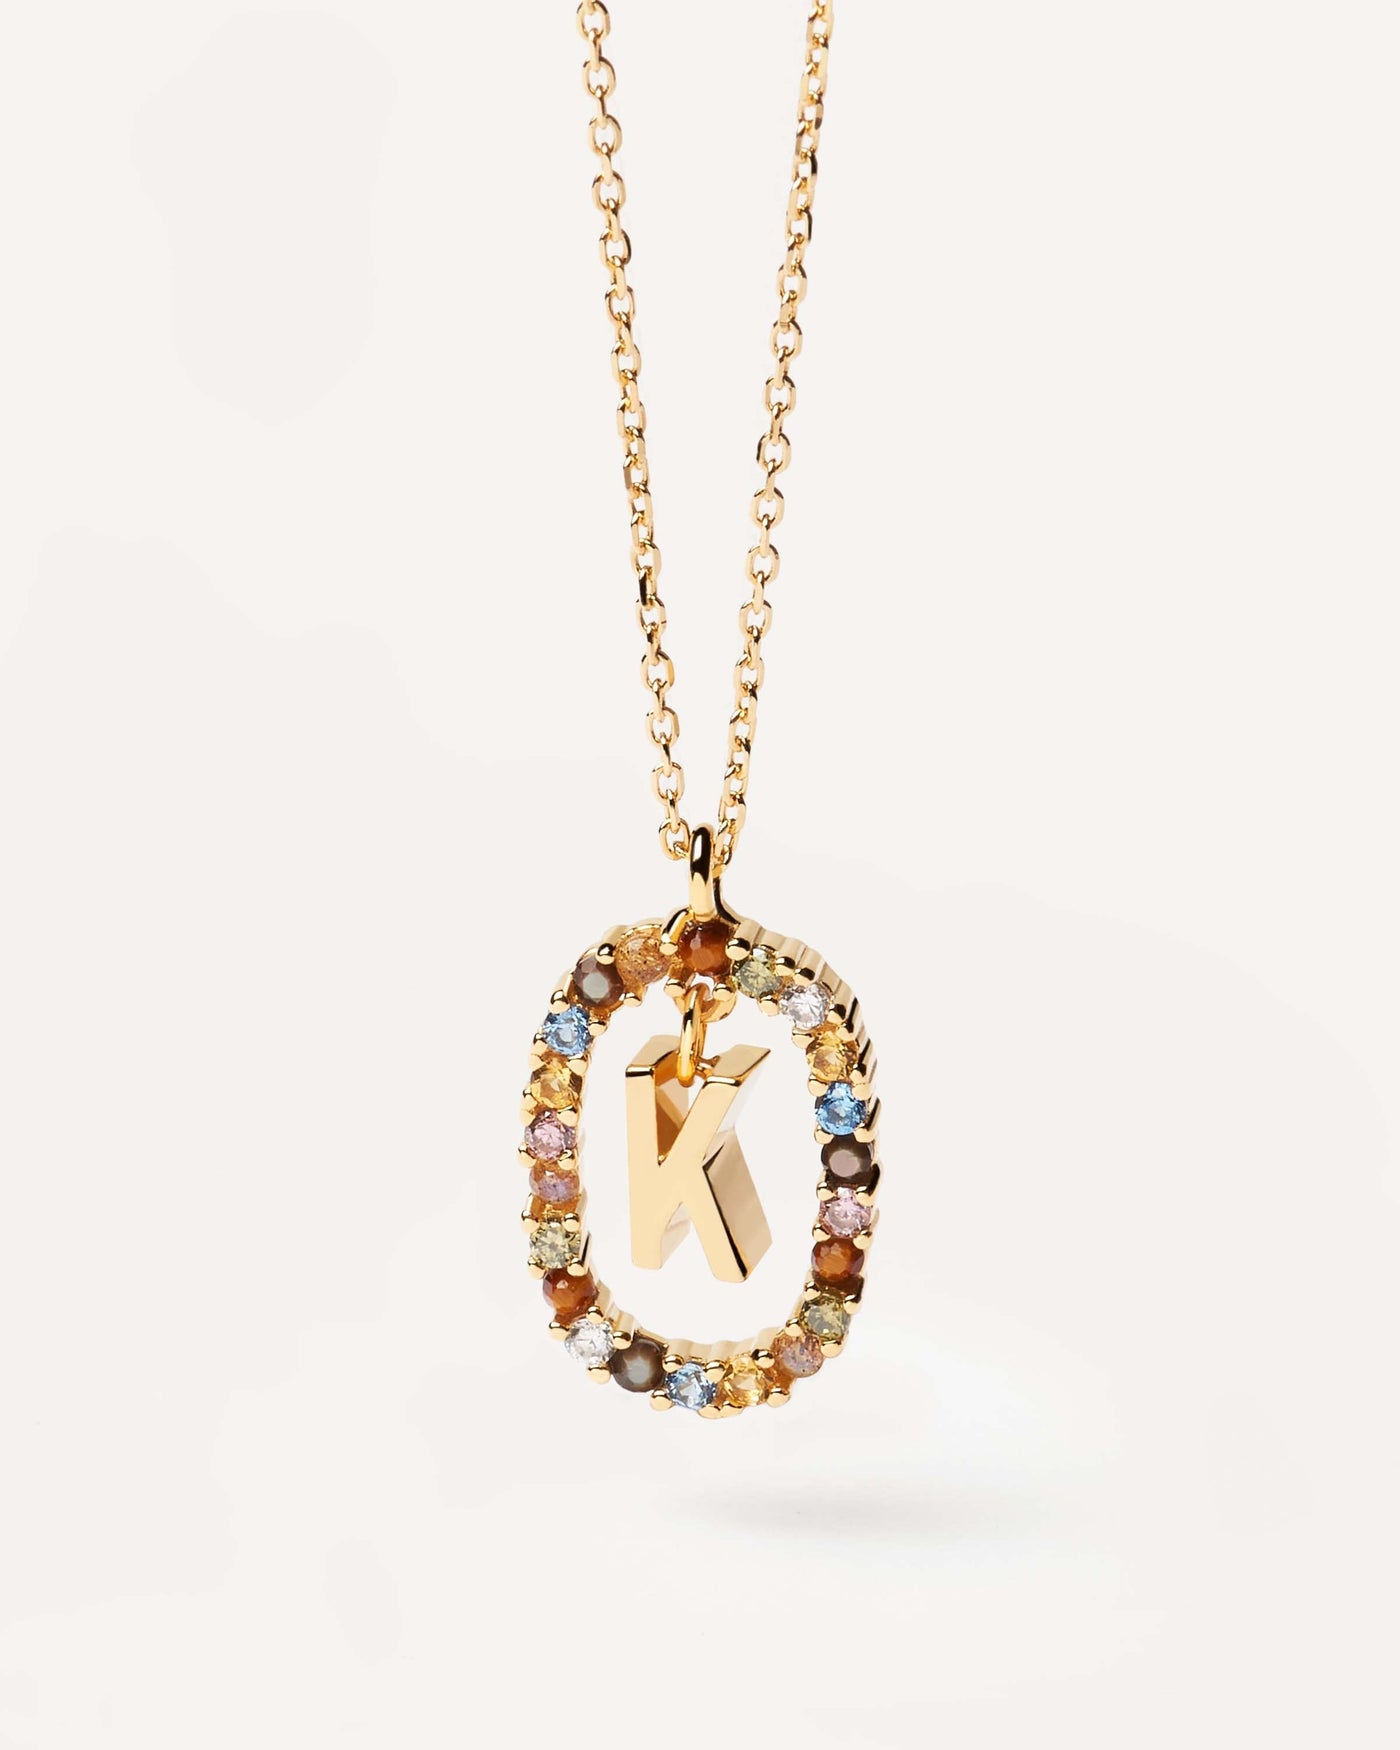 2023 Selection | Letter K necklace. Initial K necklace in gold-plated silver, circled by colorful gemstones. Get the latest arrival from PDPAOLA. Place your order safely and get this Best Seller. Free Shipping.